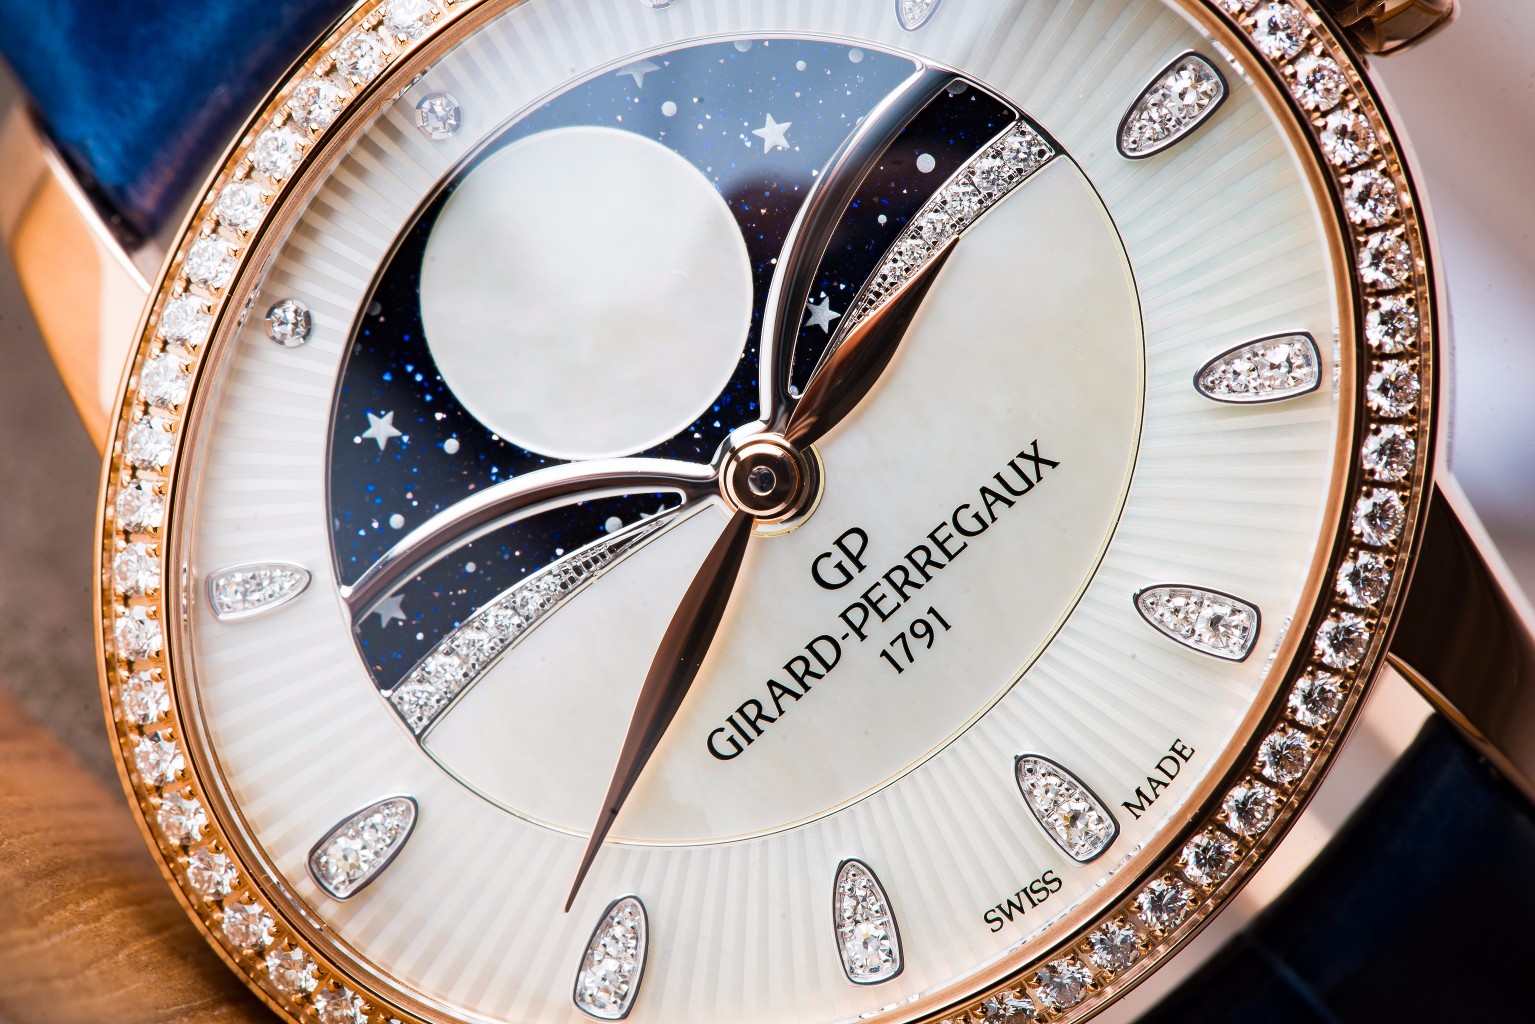 Celebrating Tonight’s Full Moon With Gorgeous Moon Phase Watches